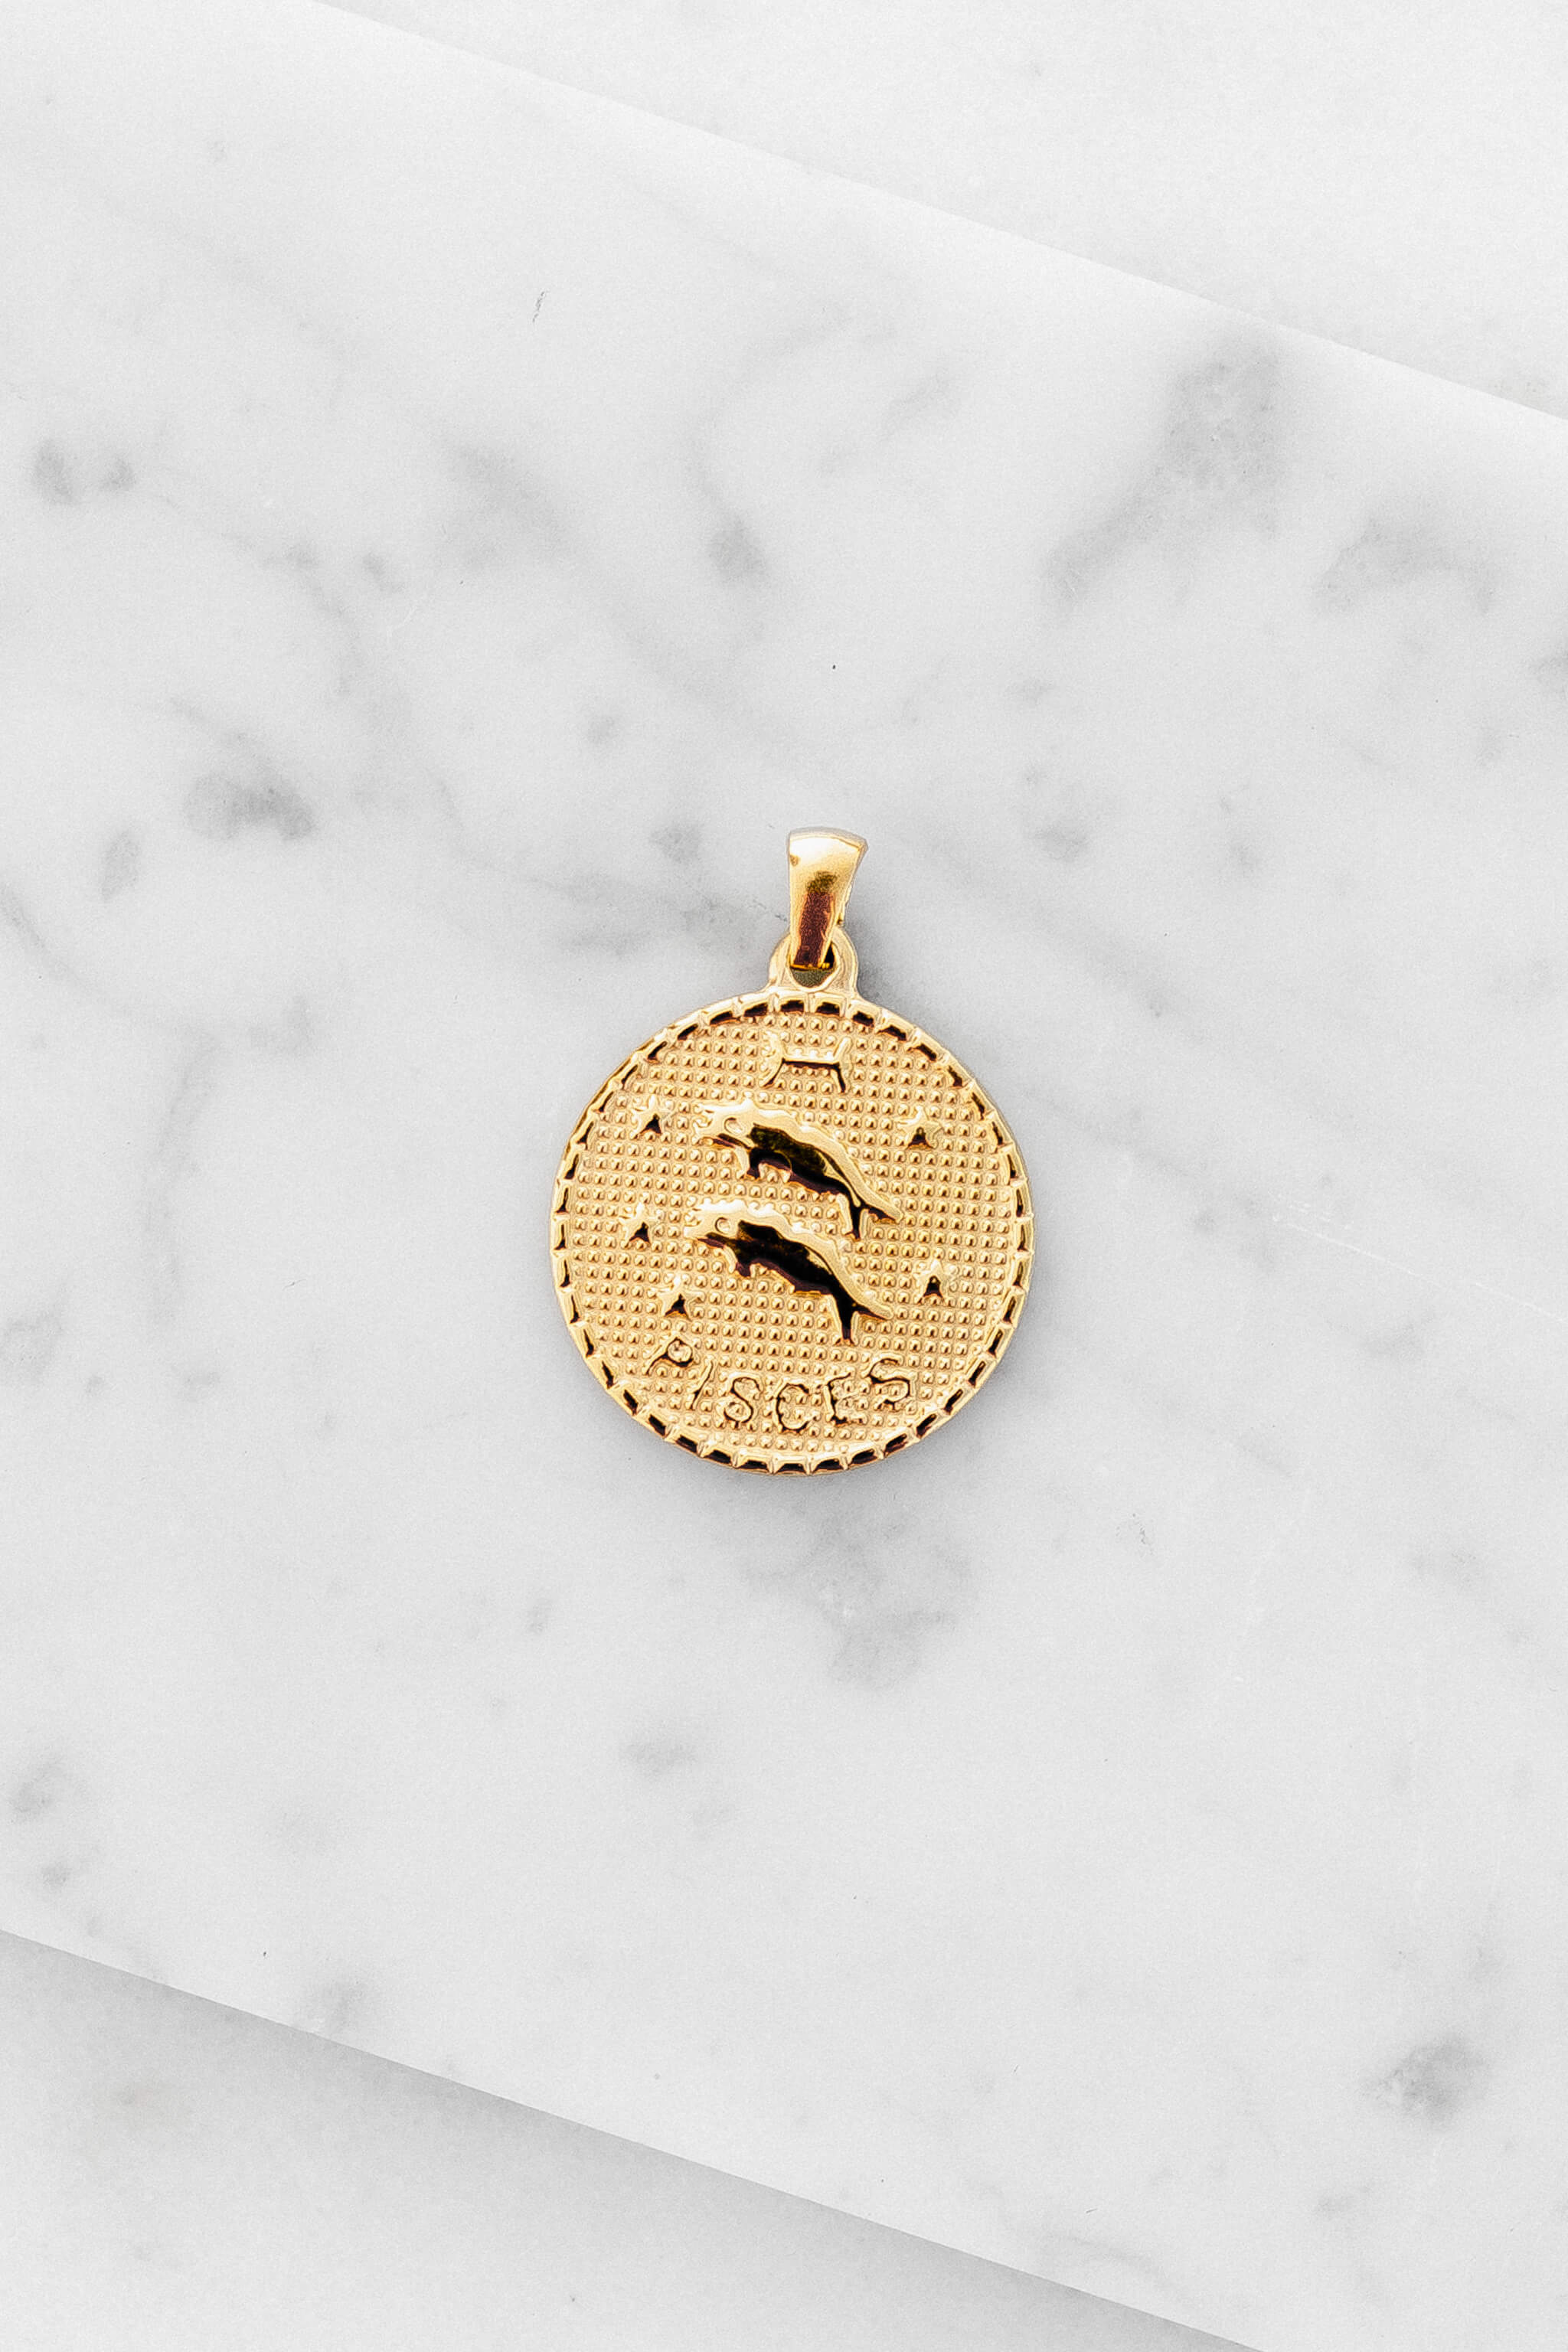 Pisces zodiac sign gold coin charm laying on a white marble